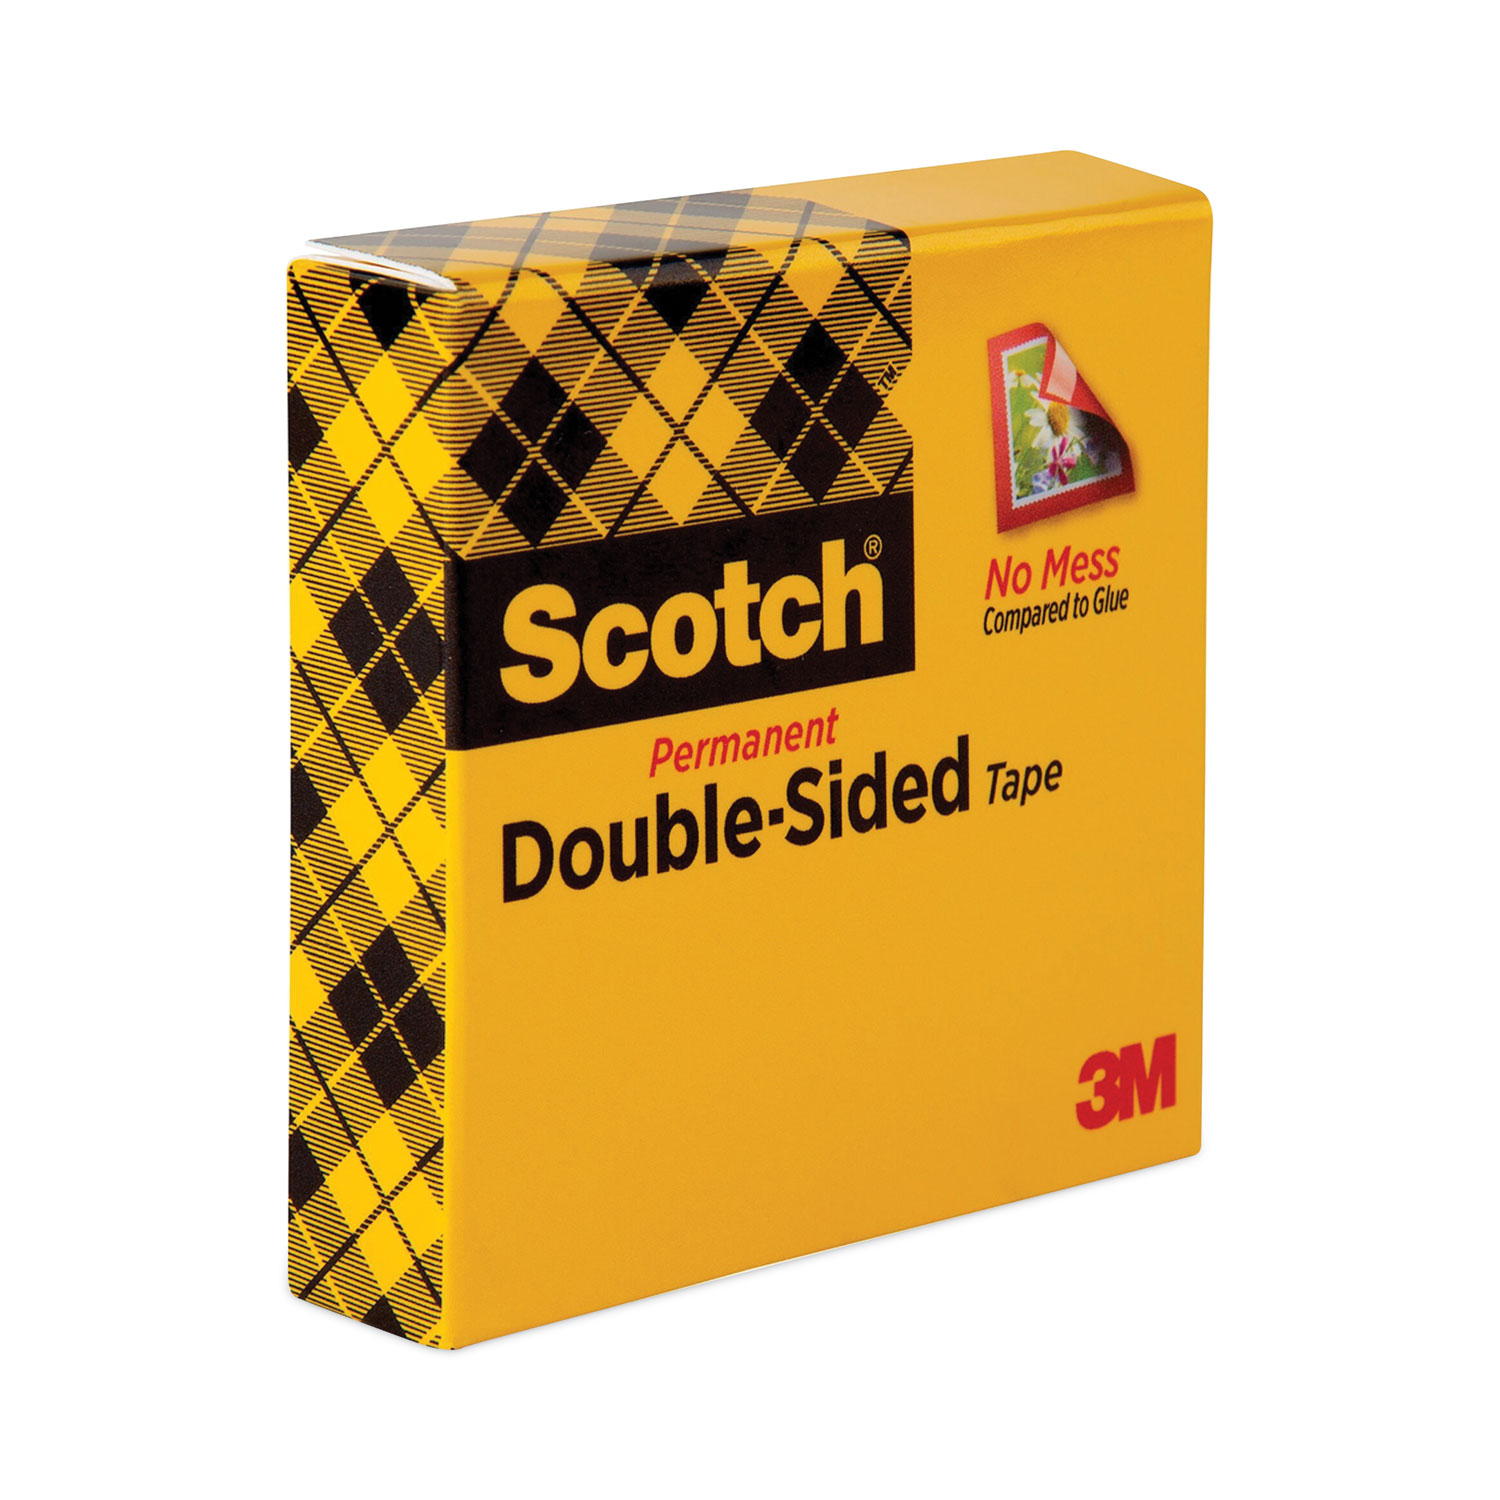 2 Scotch 3M Scrapbooking Tape Double-Sided Photo & Document Tape 0.5 x 300  EACH - Hyssop Properties